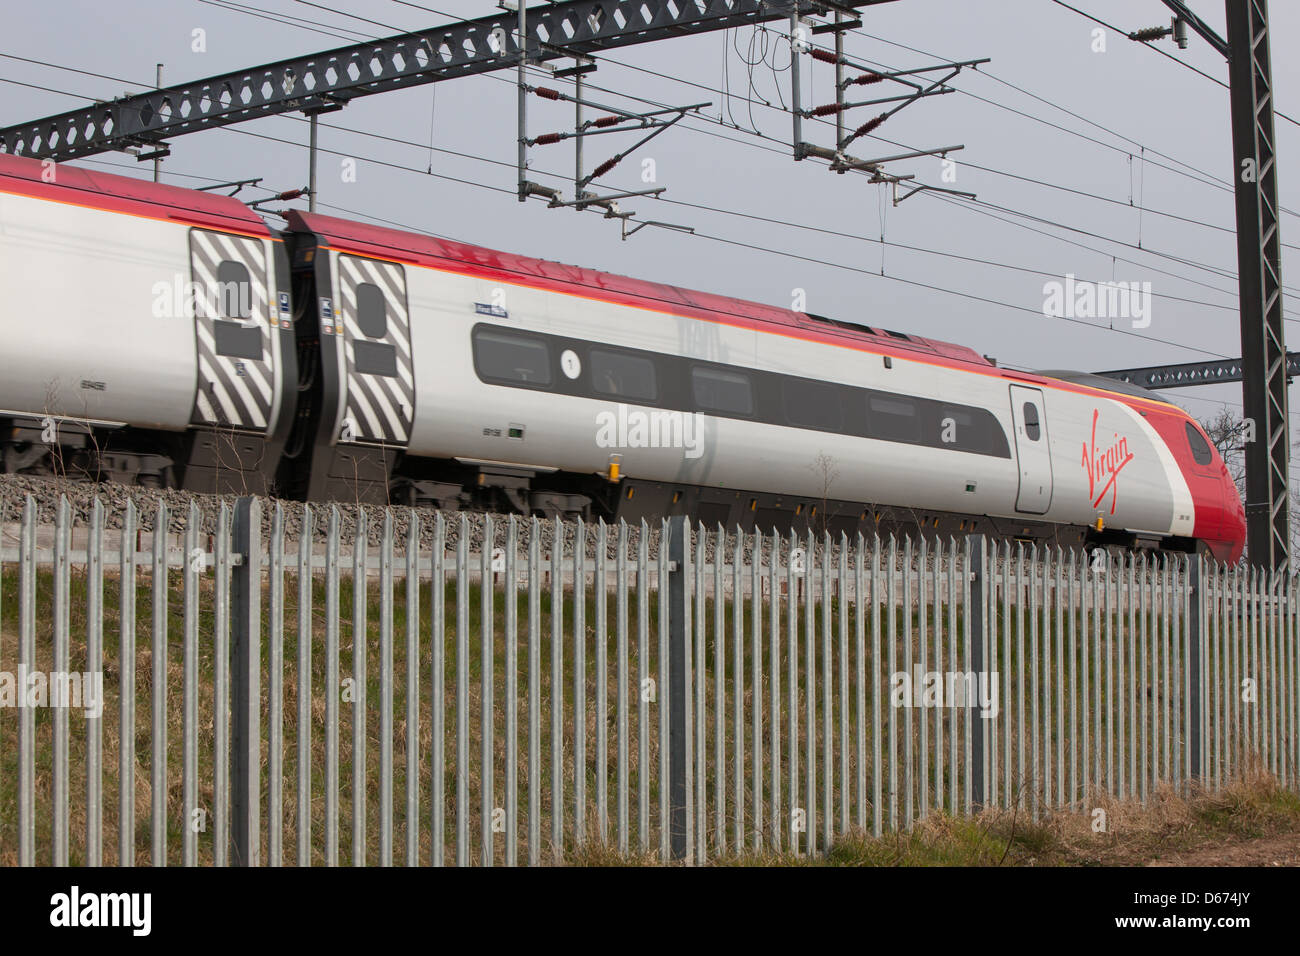 A Virgin train on the West Coast Mainline in the Midlands. Stock Photo